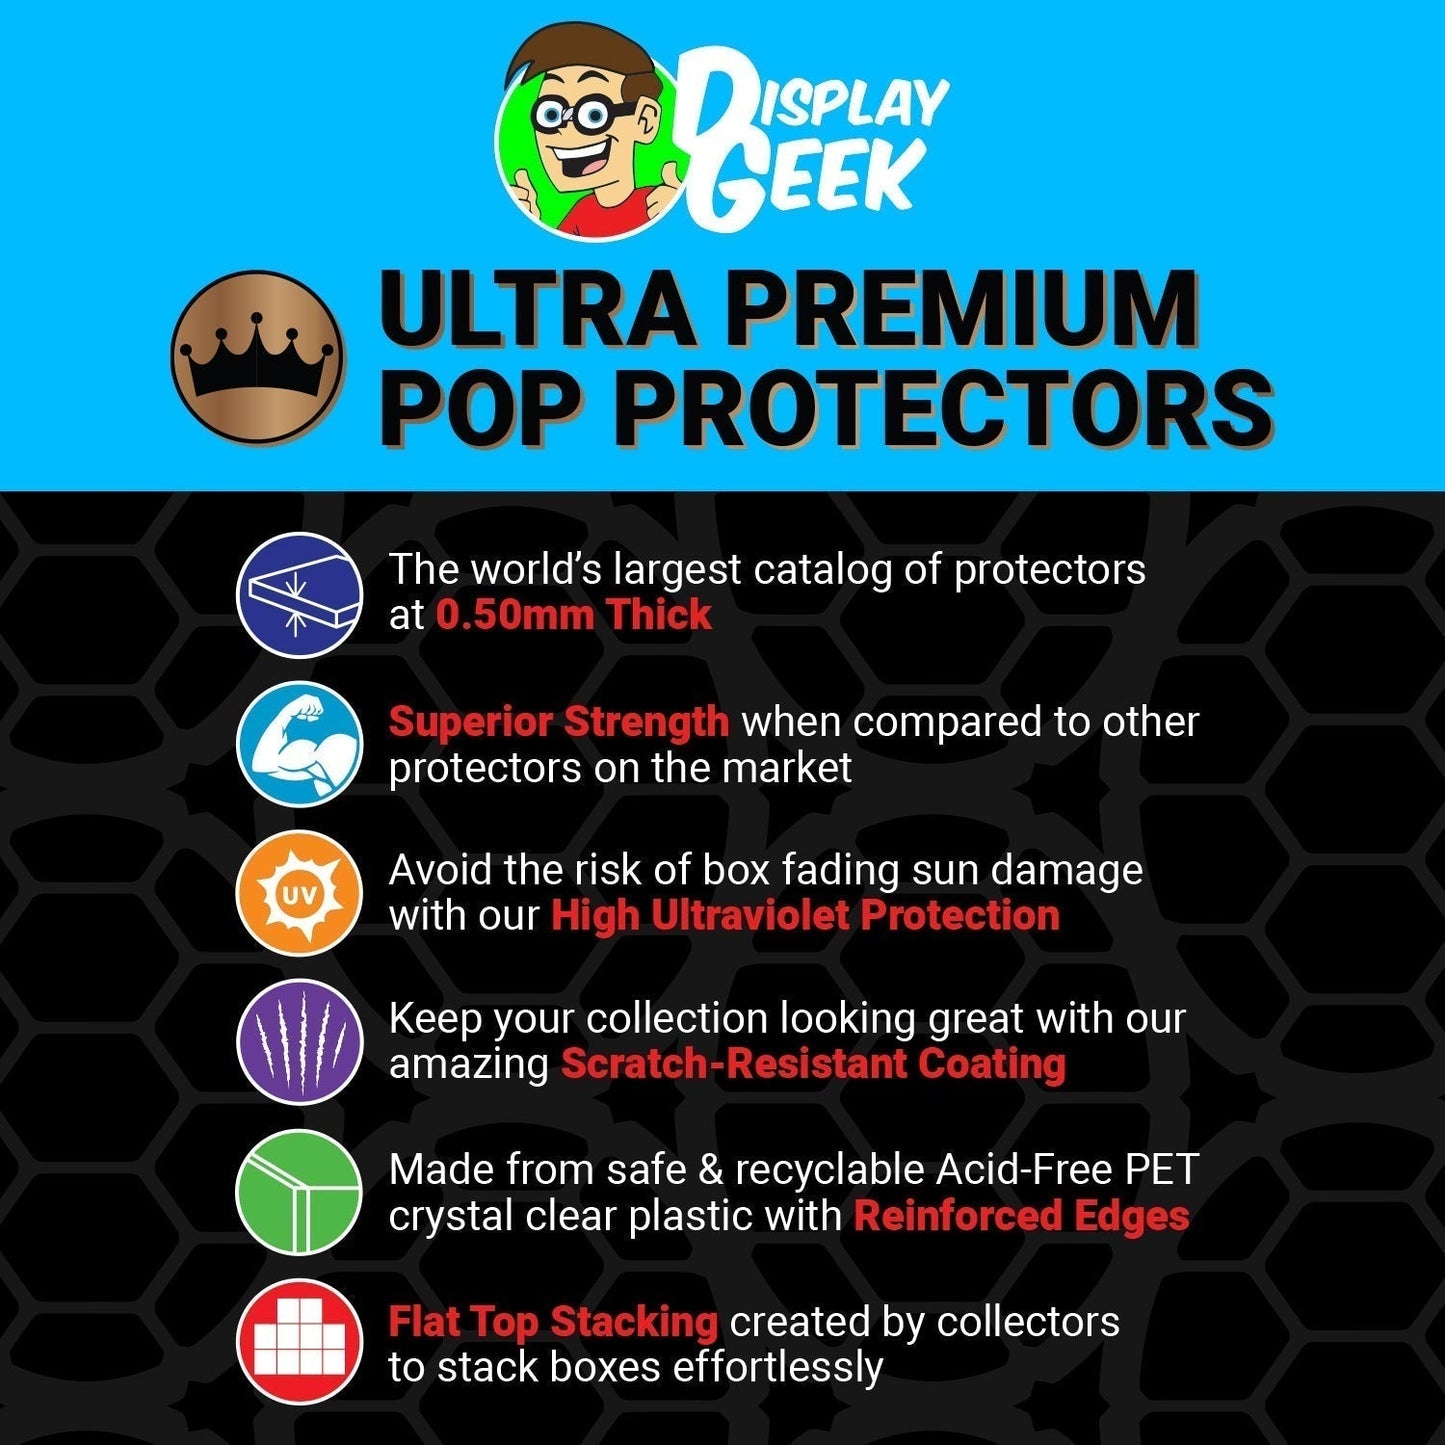 Pop Protector for Guardians Ship Star-Lord in Benatar #1021 Funko Pop Deluxe - PPG Pop Protector Guide Search Created by Display Geek